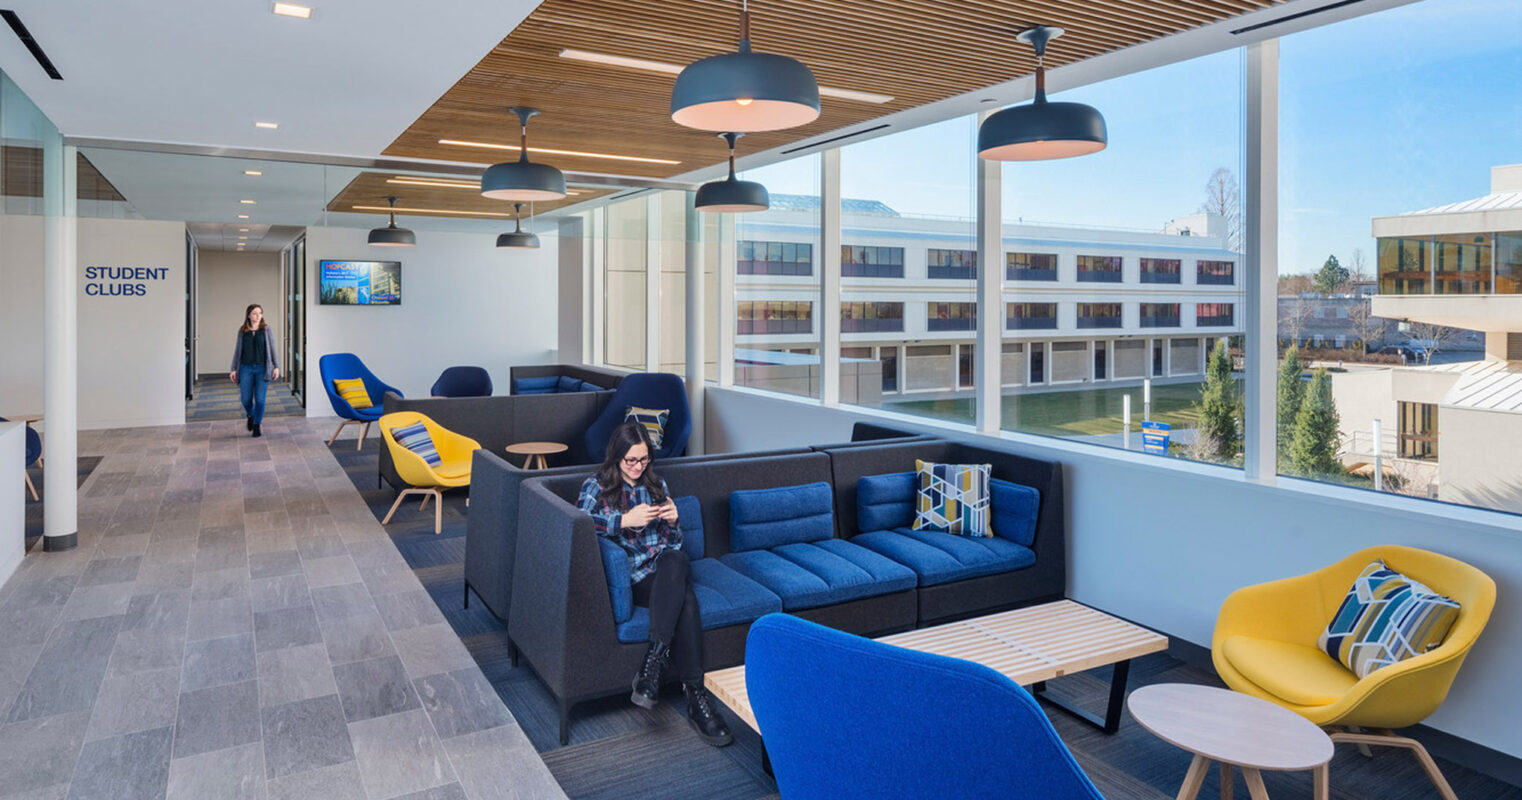 Modern open-plan student lounge featuring navy and yellow accent furniture, wood slat ceilings with pendant lighting, and expansive windows providing abundant natural light and a view of the surrounding campus.